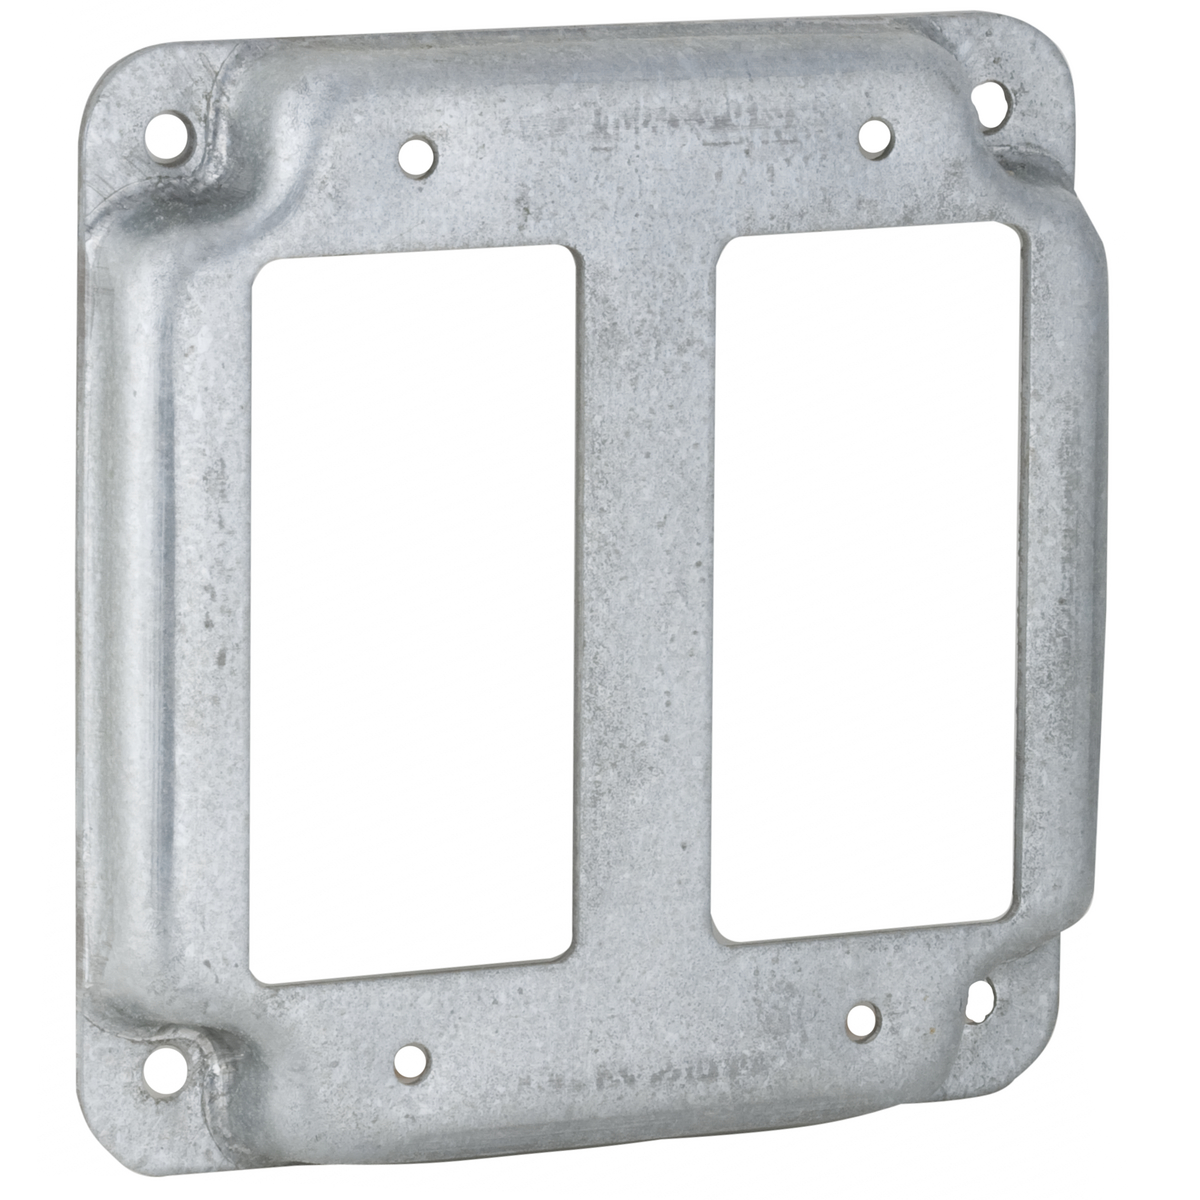 RACO 809C 4" SQUARE EXPOSED WORK COVER, 2 GFCI